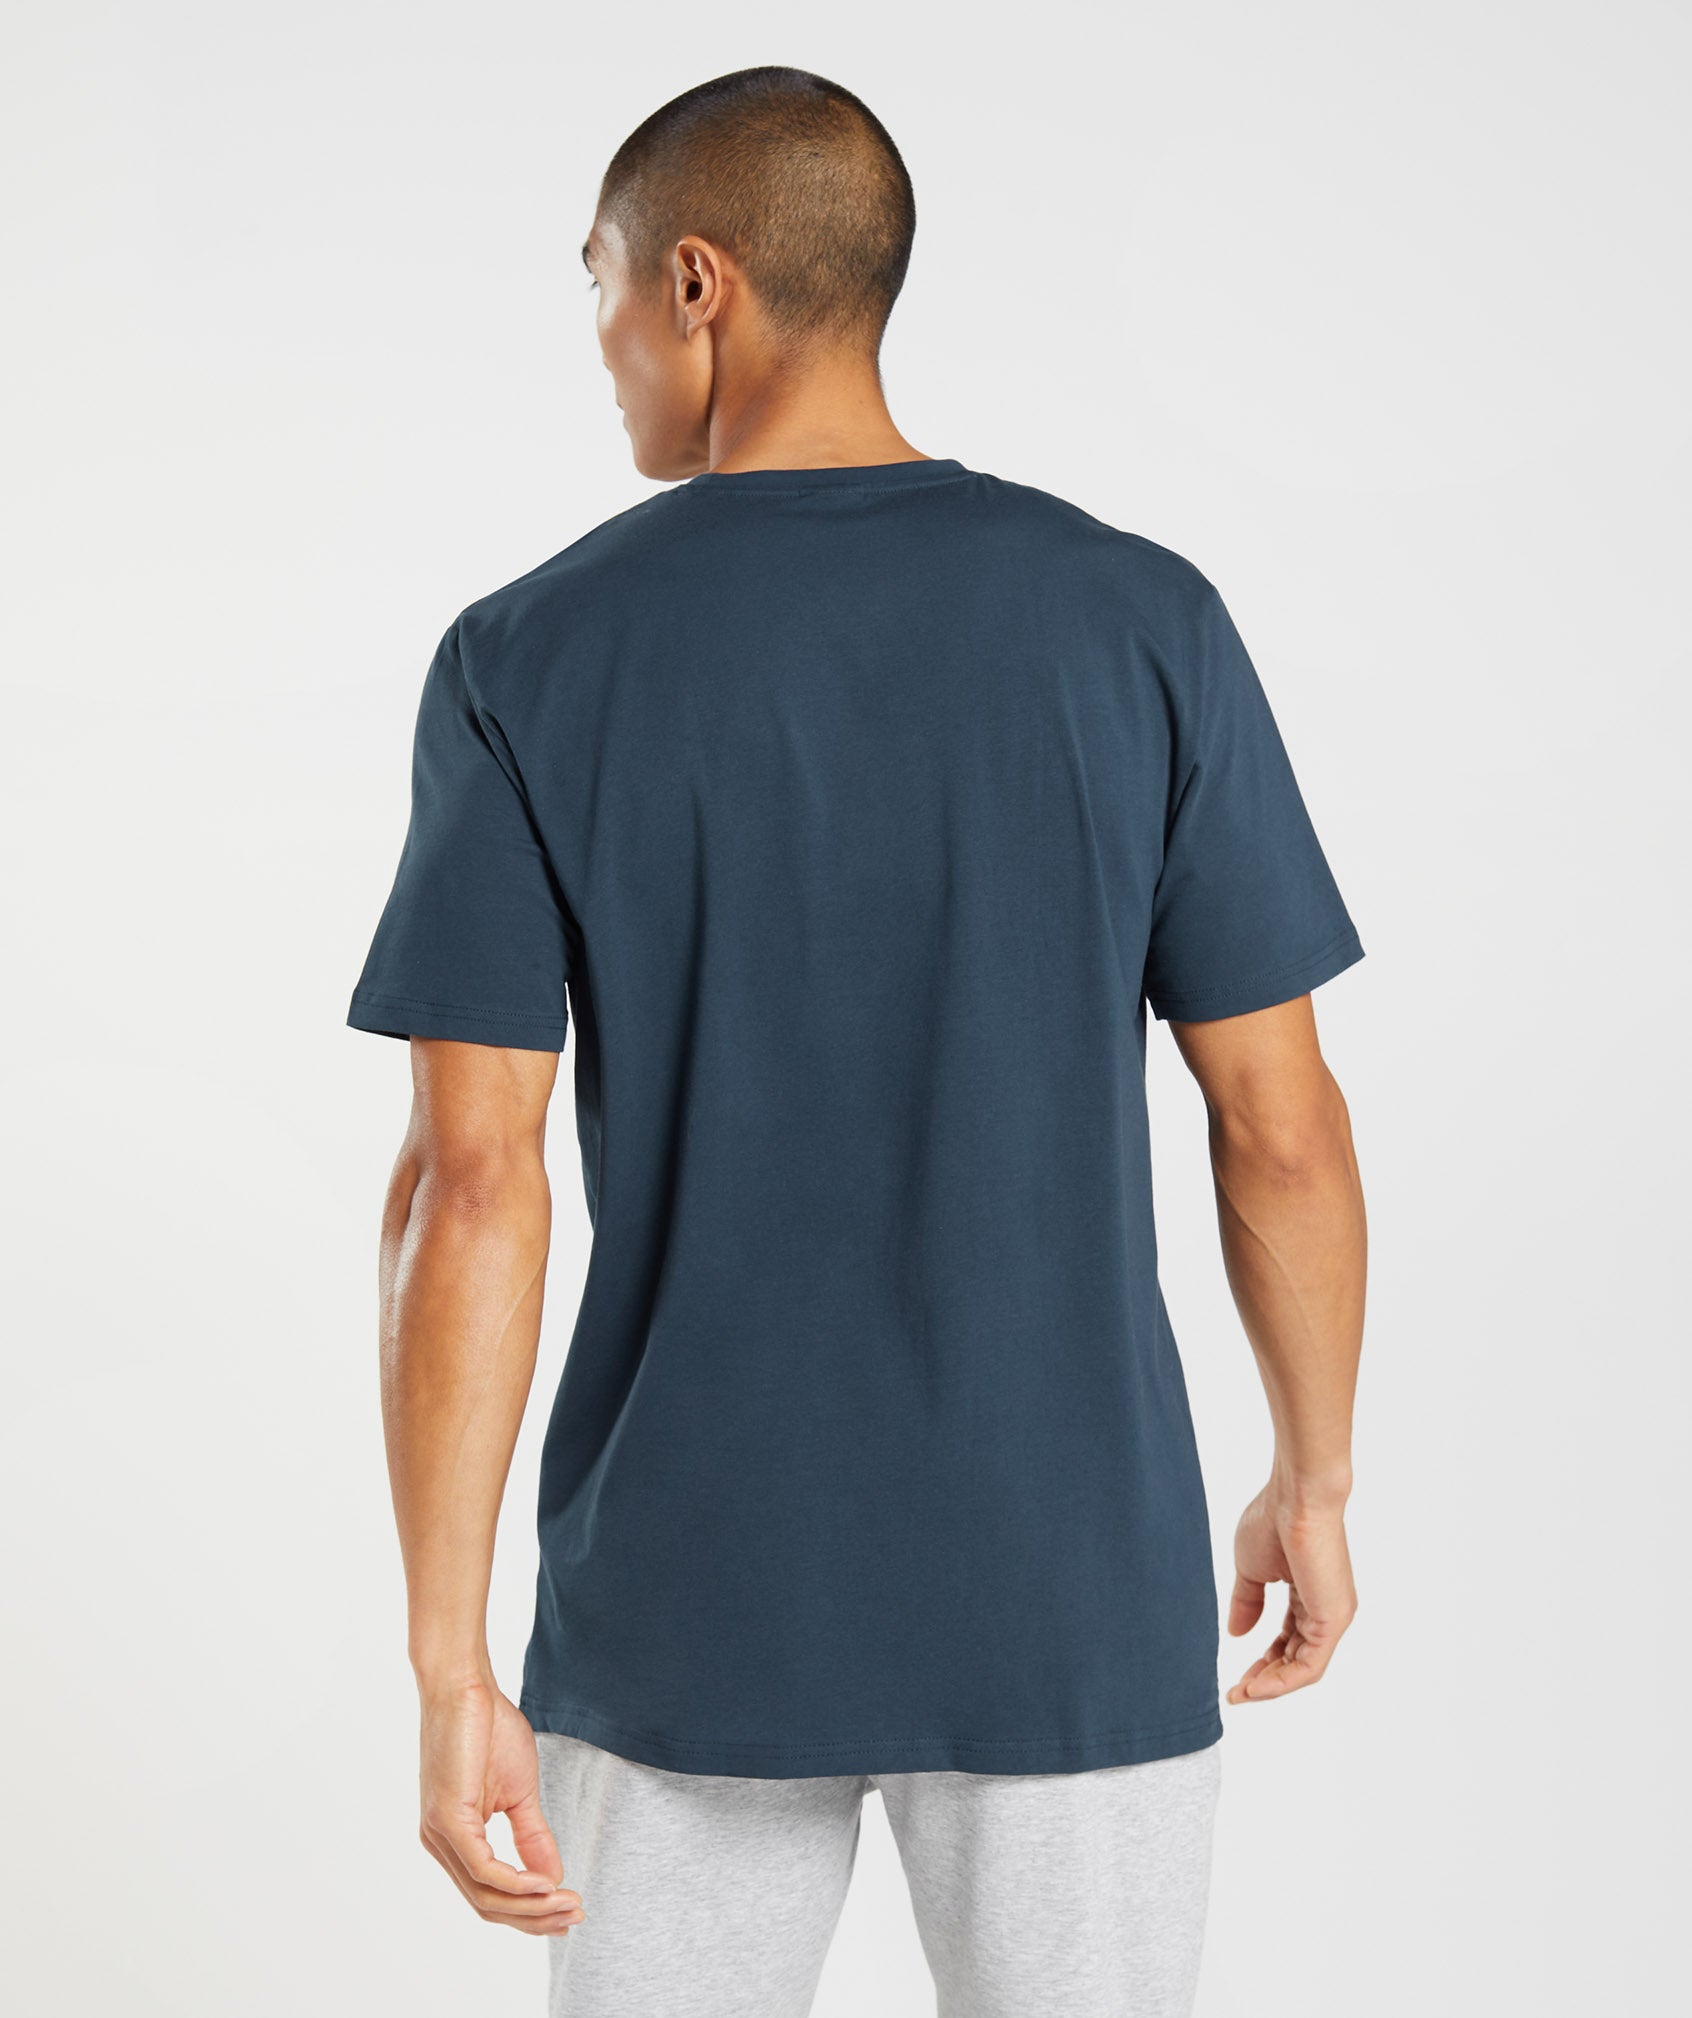 Outline T-Shirt in Navy - view 2